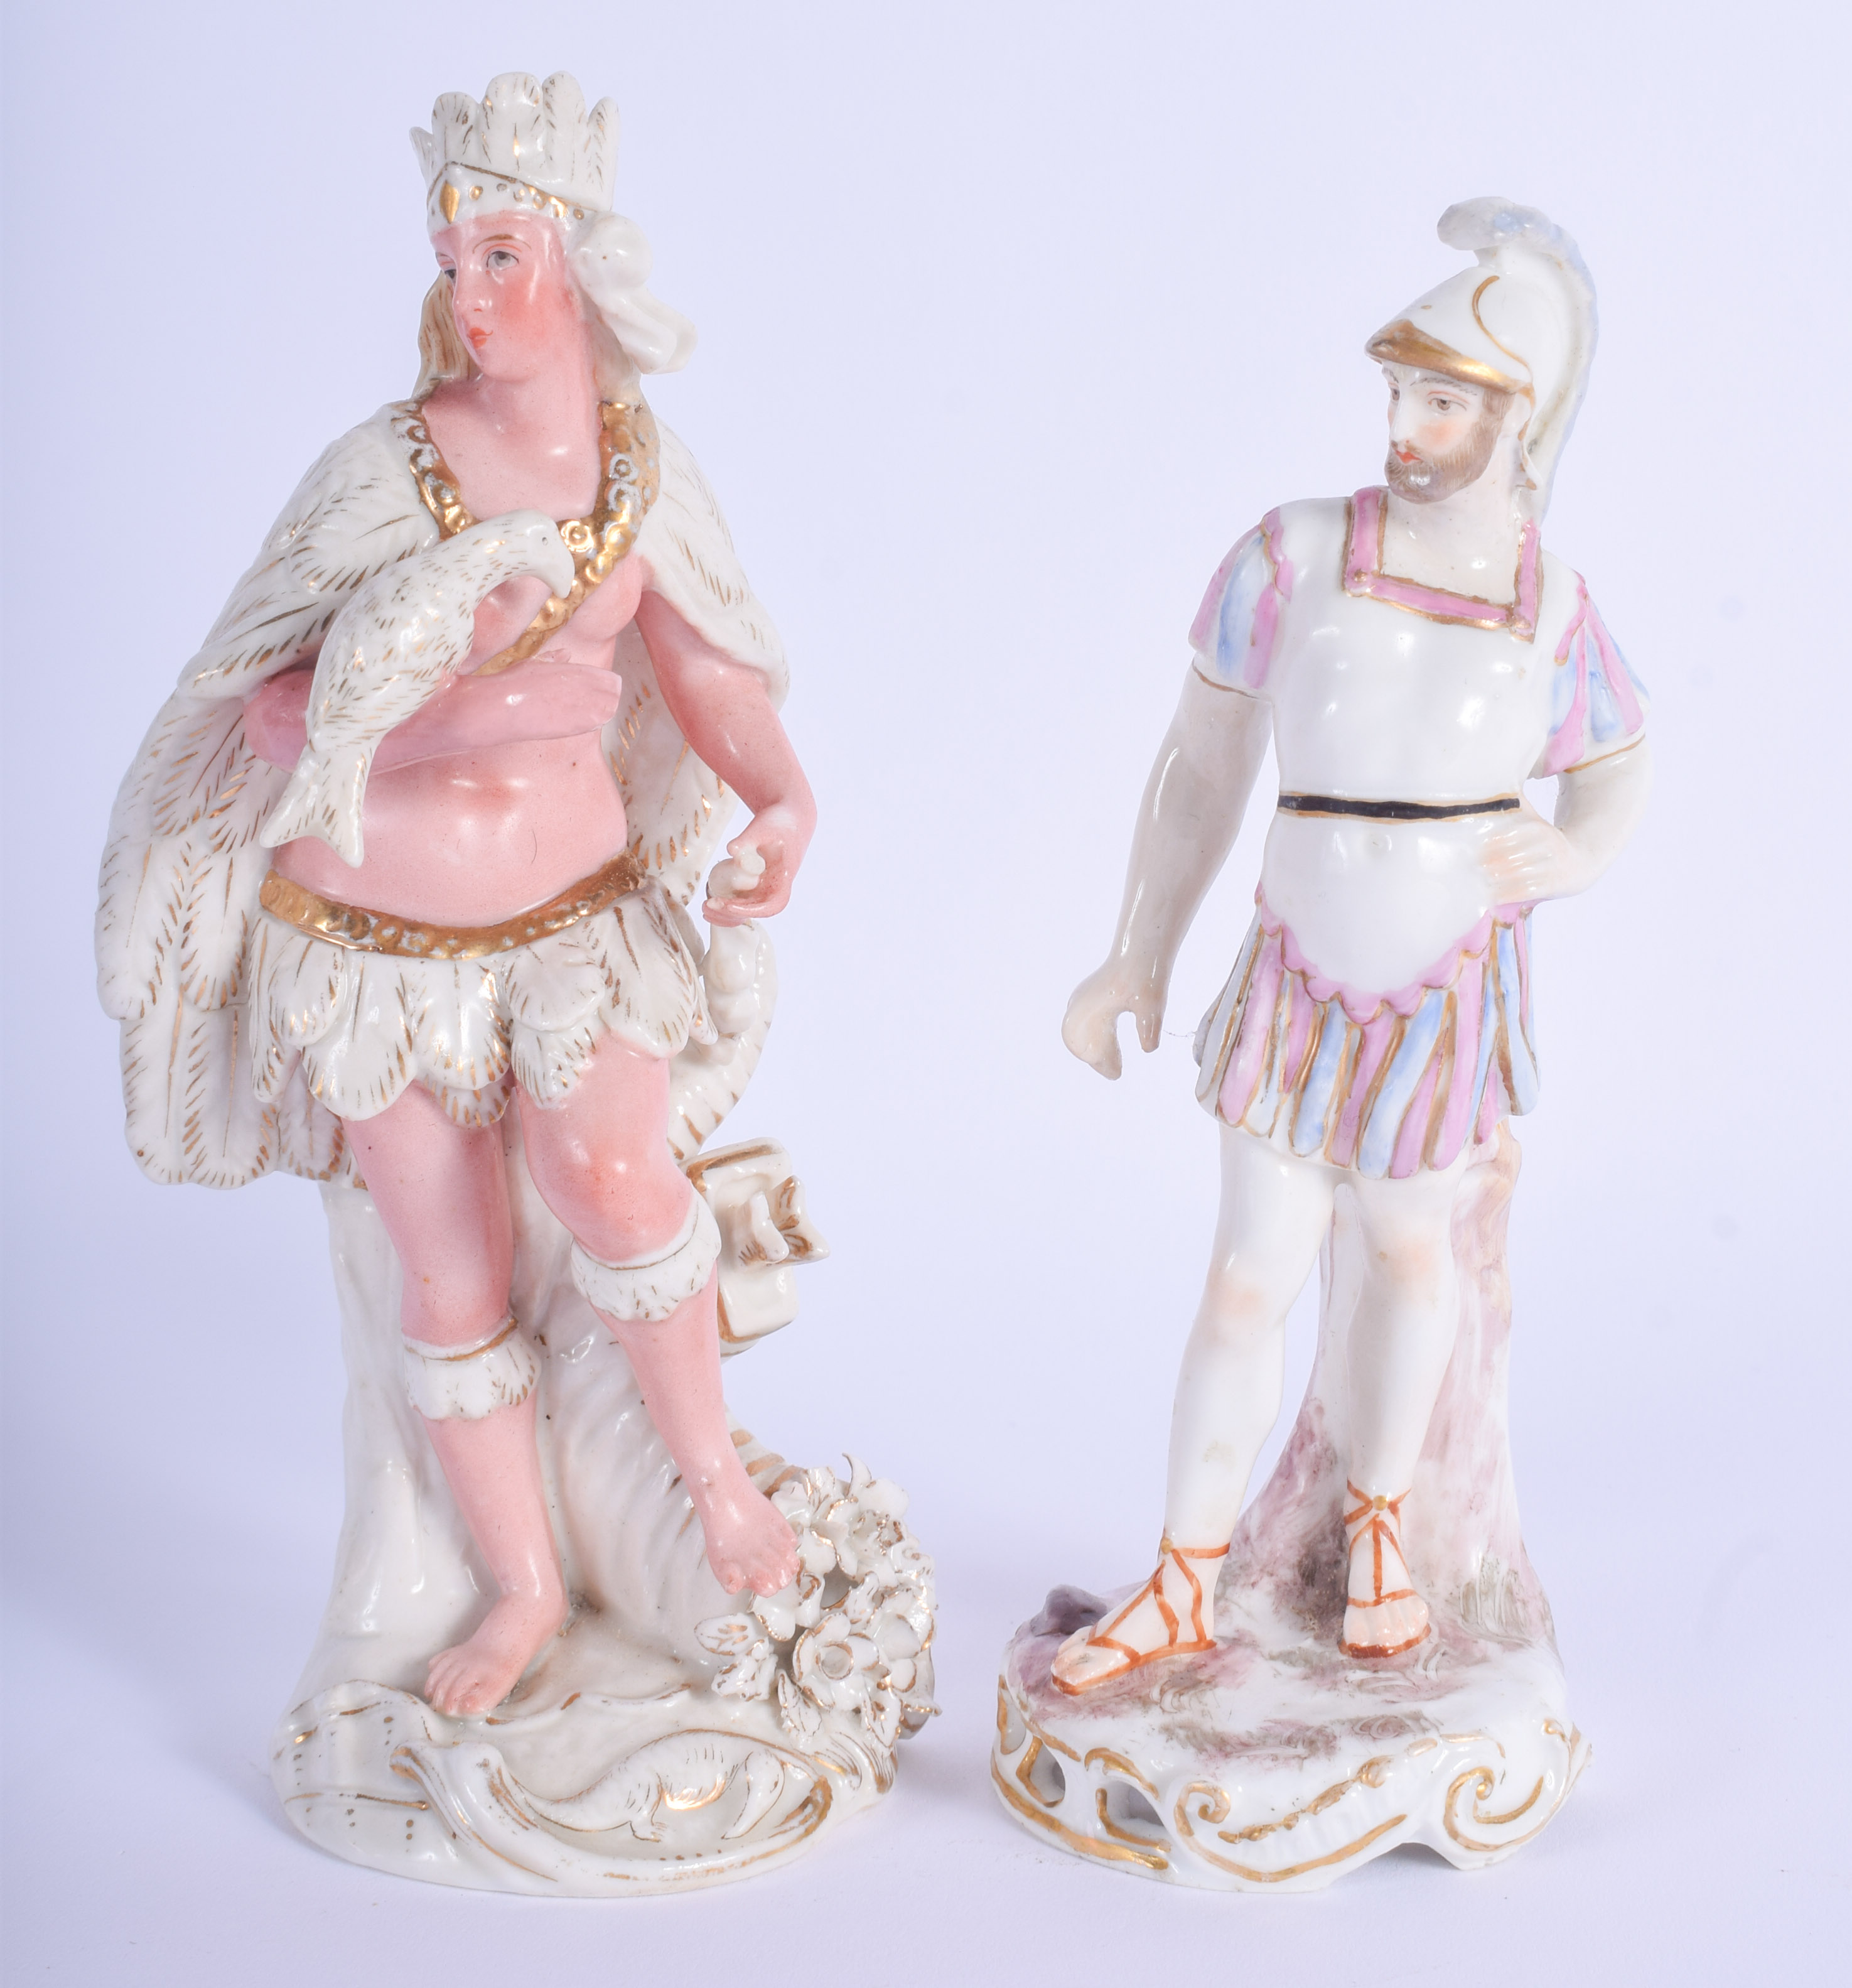 A PAIR OF 19TH CENTURY CONTINENTAL PORCELAIN FIGURES after 18th century originals. 16.5 cm high.